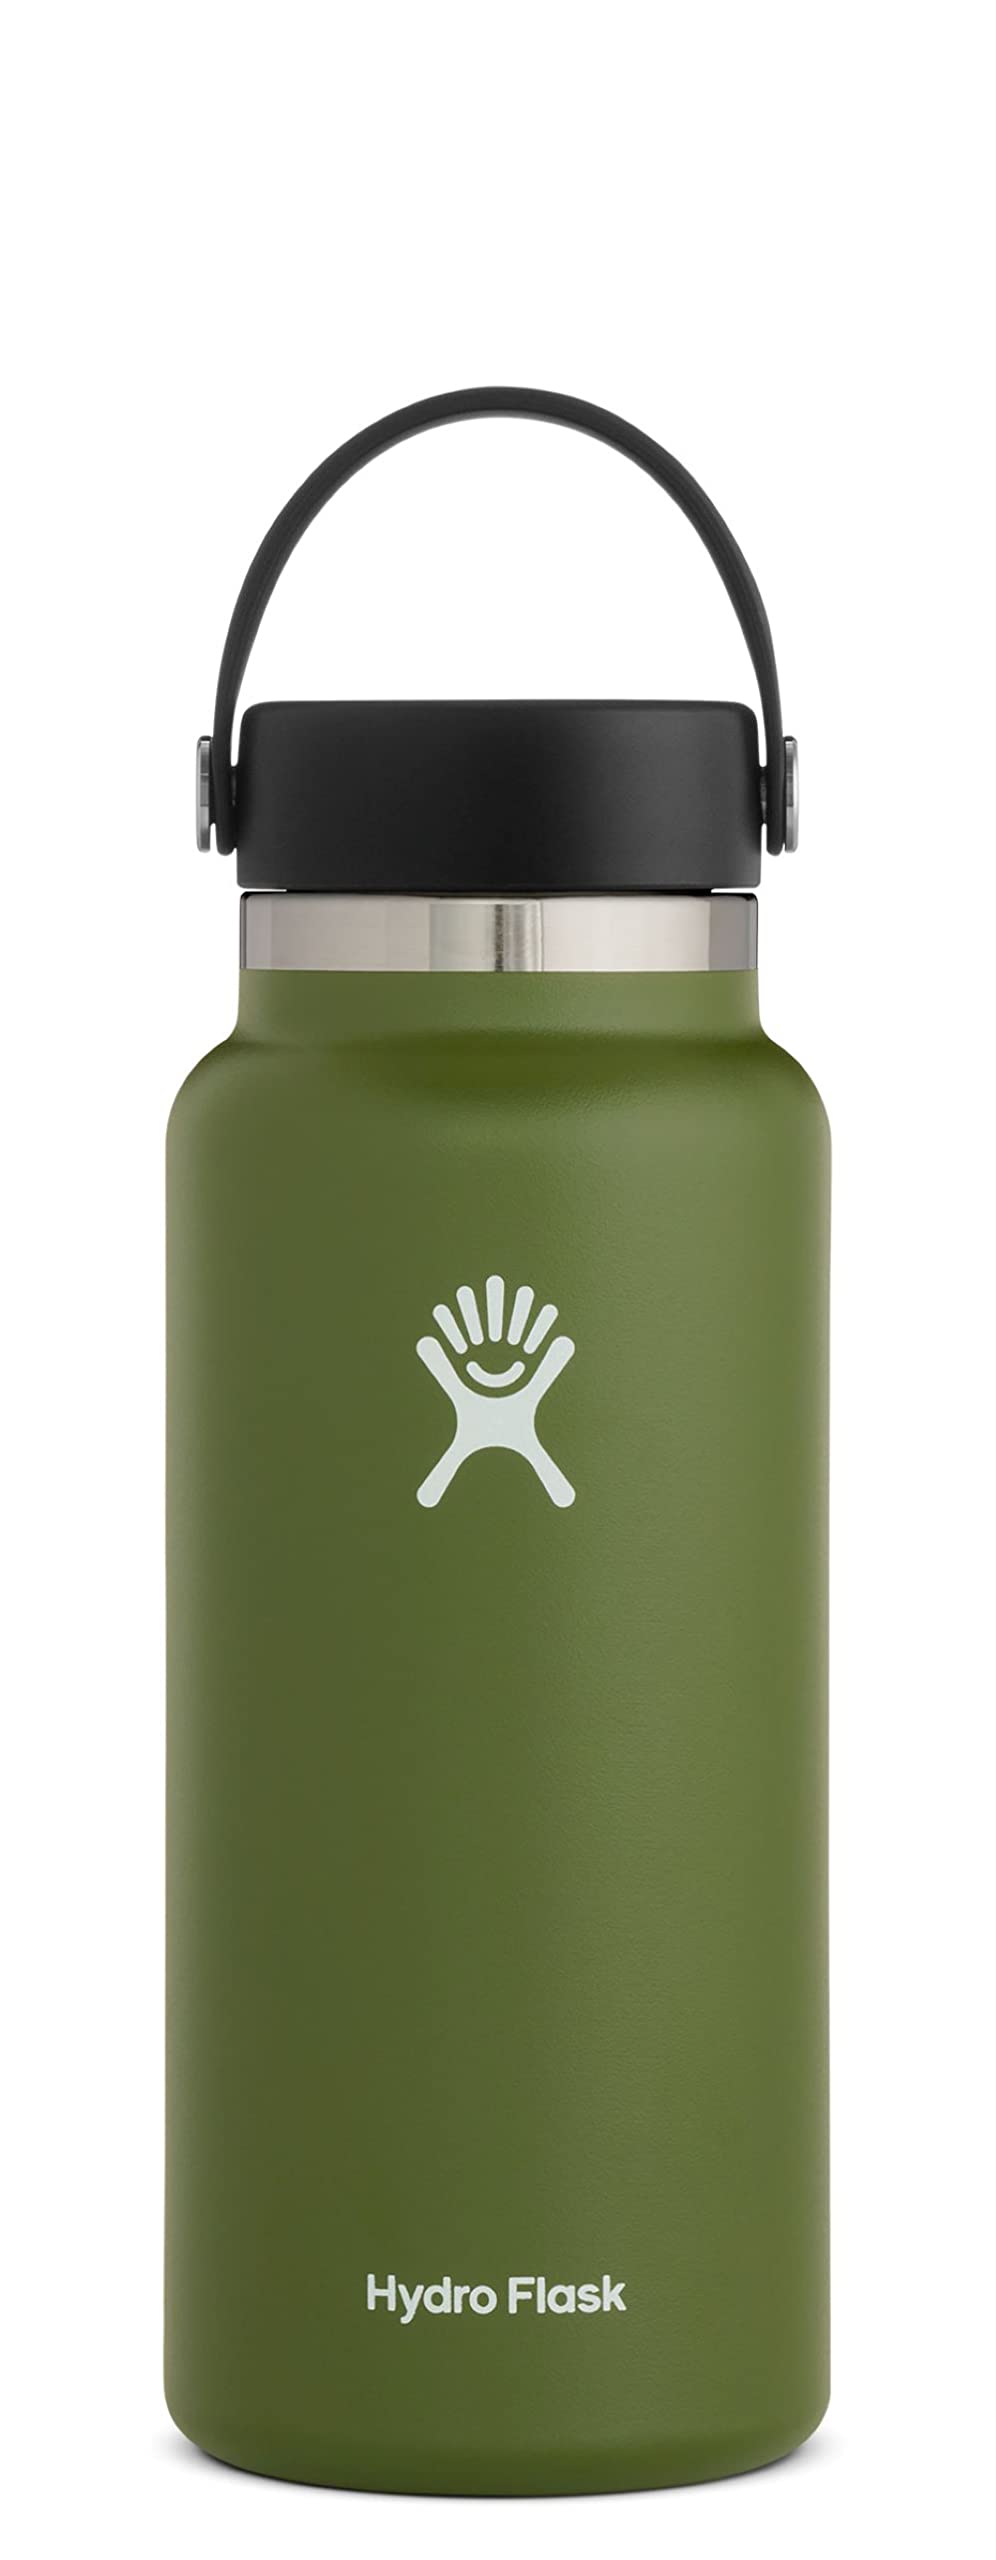 Hydro Flask 32 oz Vacuum Insulated Stainless Steel Water Bottle Flask - Flex Cap with Strap  - Wide Mouth - Olive